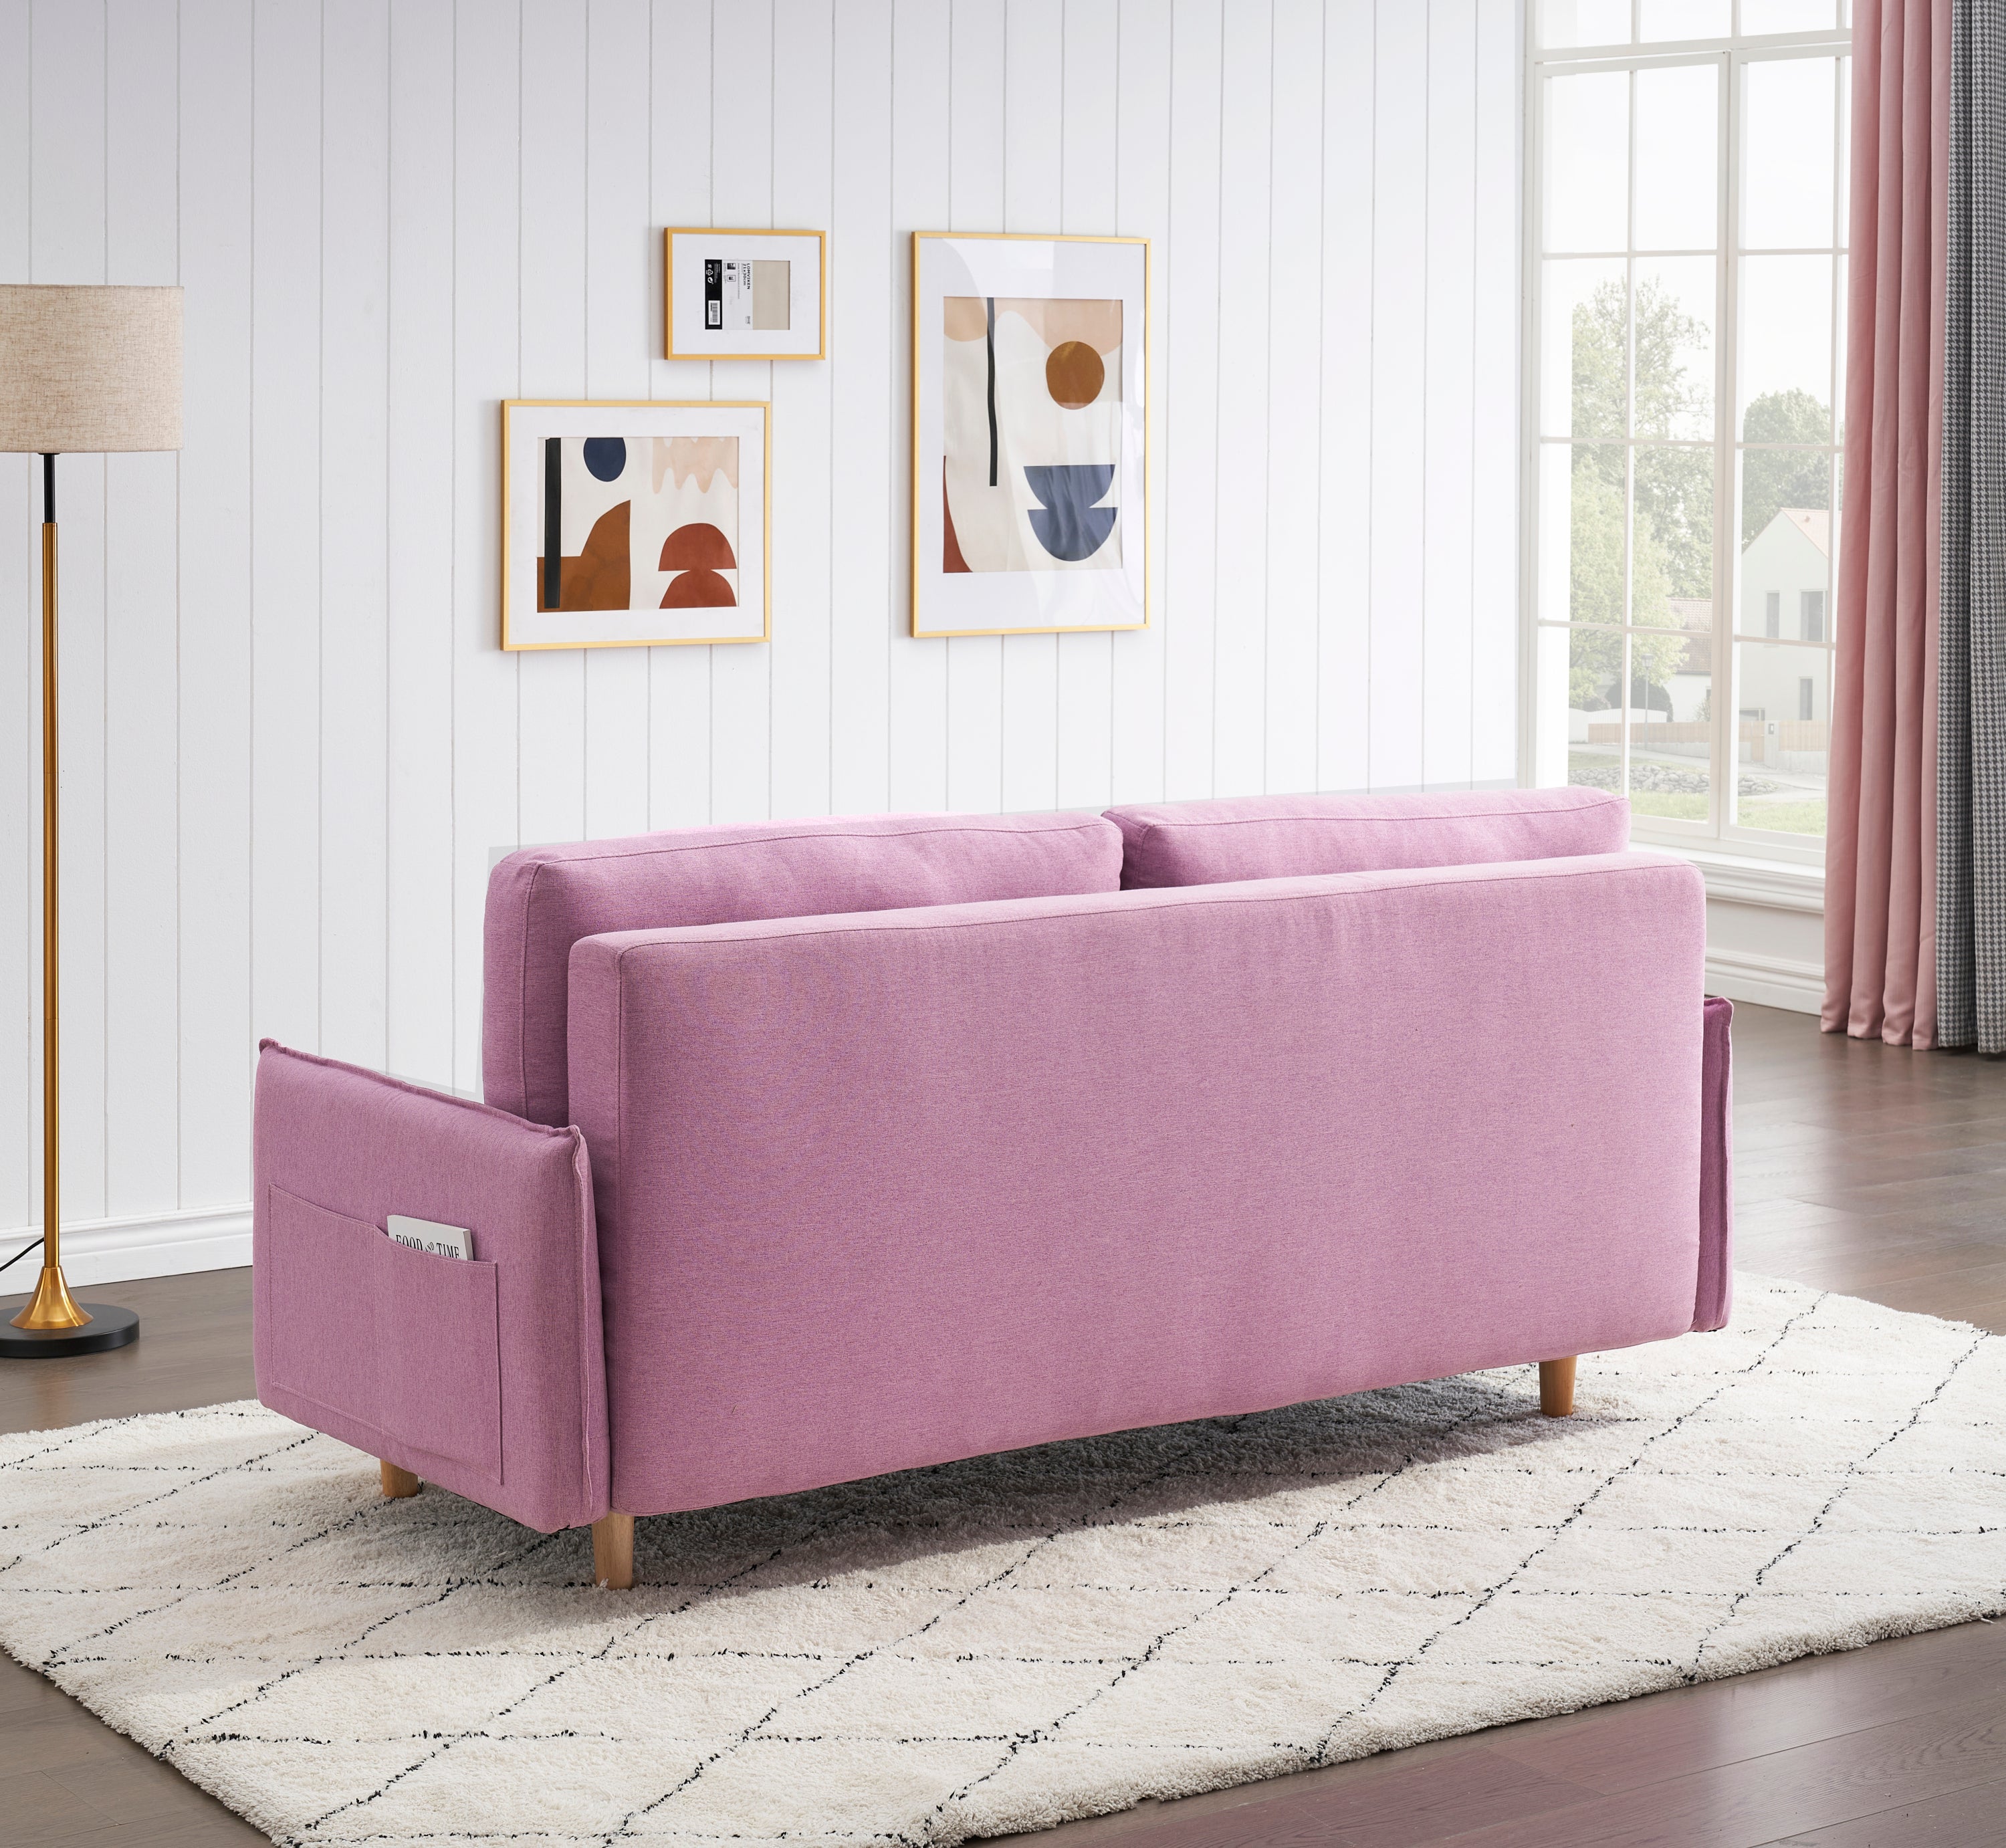 Living Room Loveseat Sofa Bed with Storage, Side Bag Pockets and Wood Legs, Pink